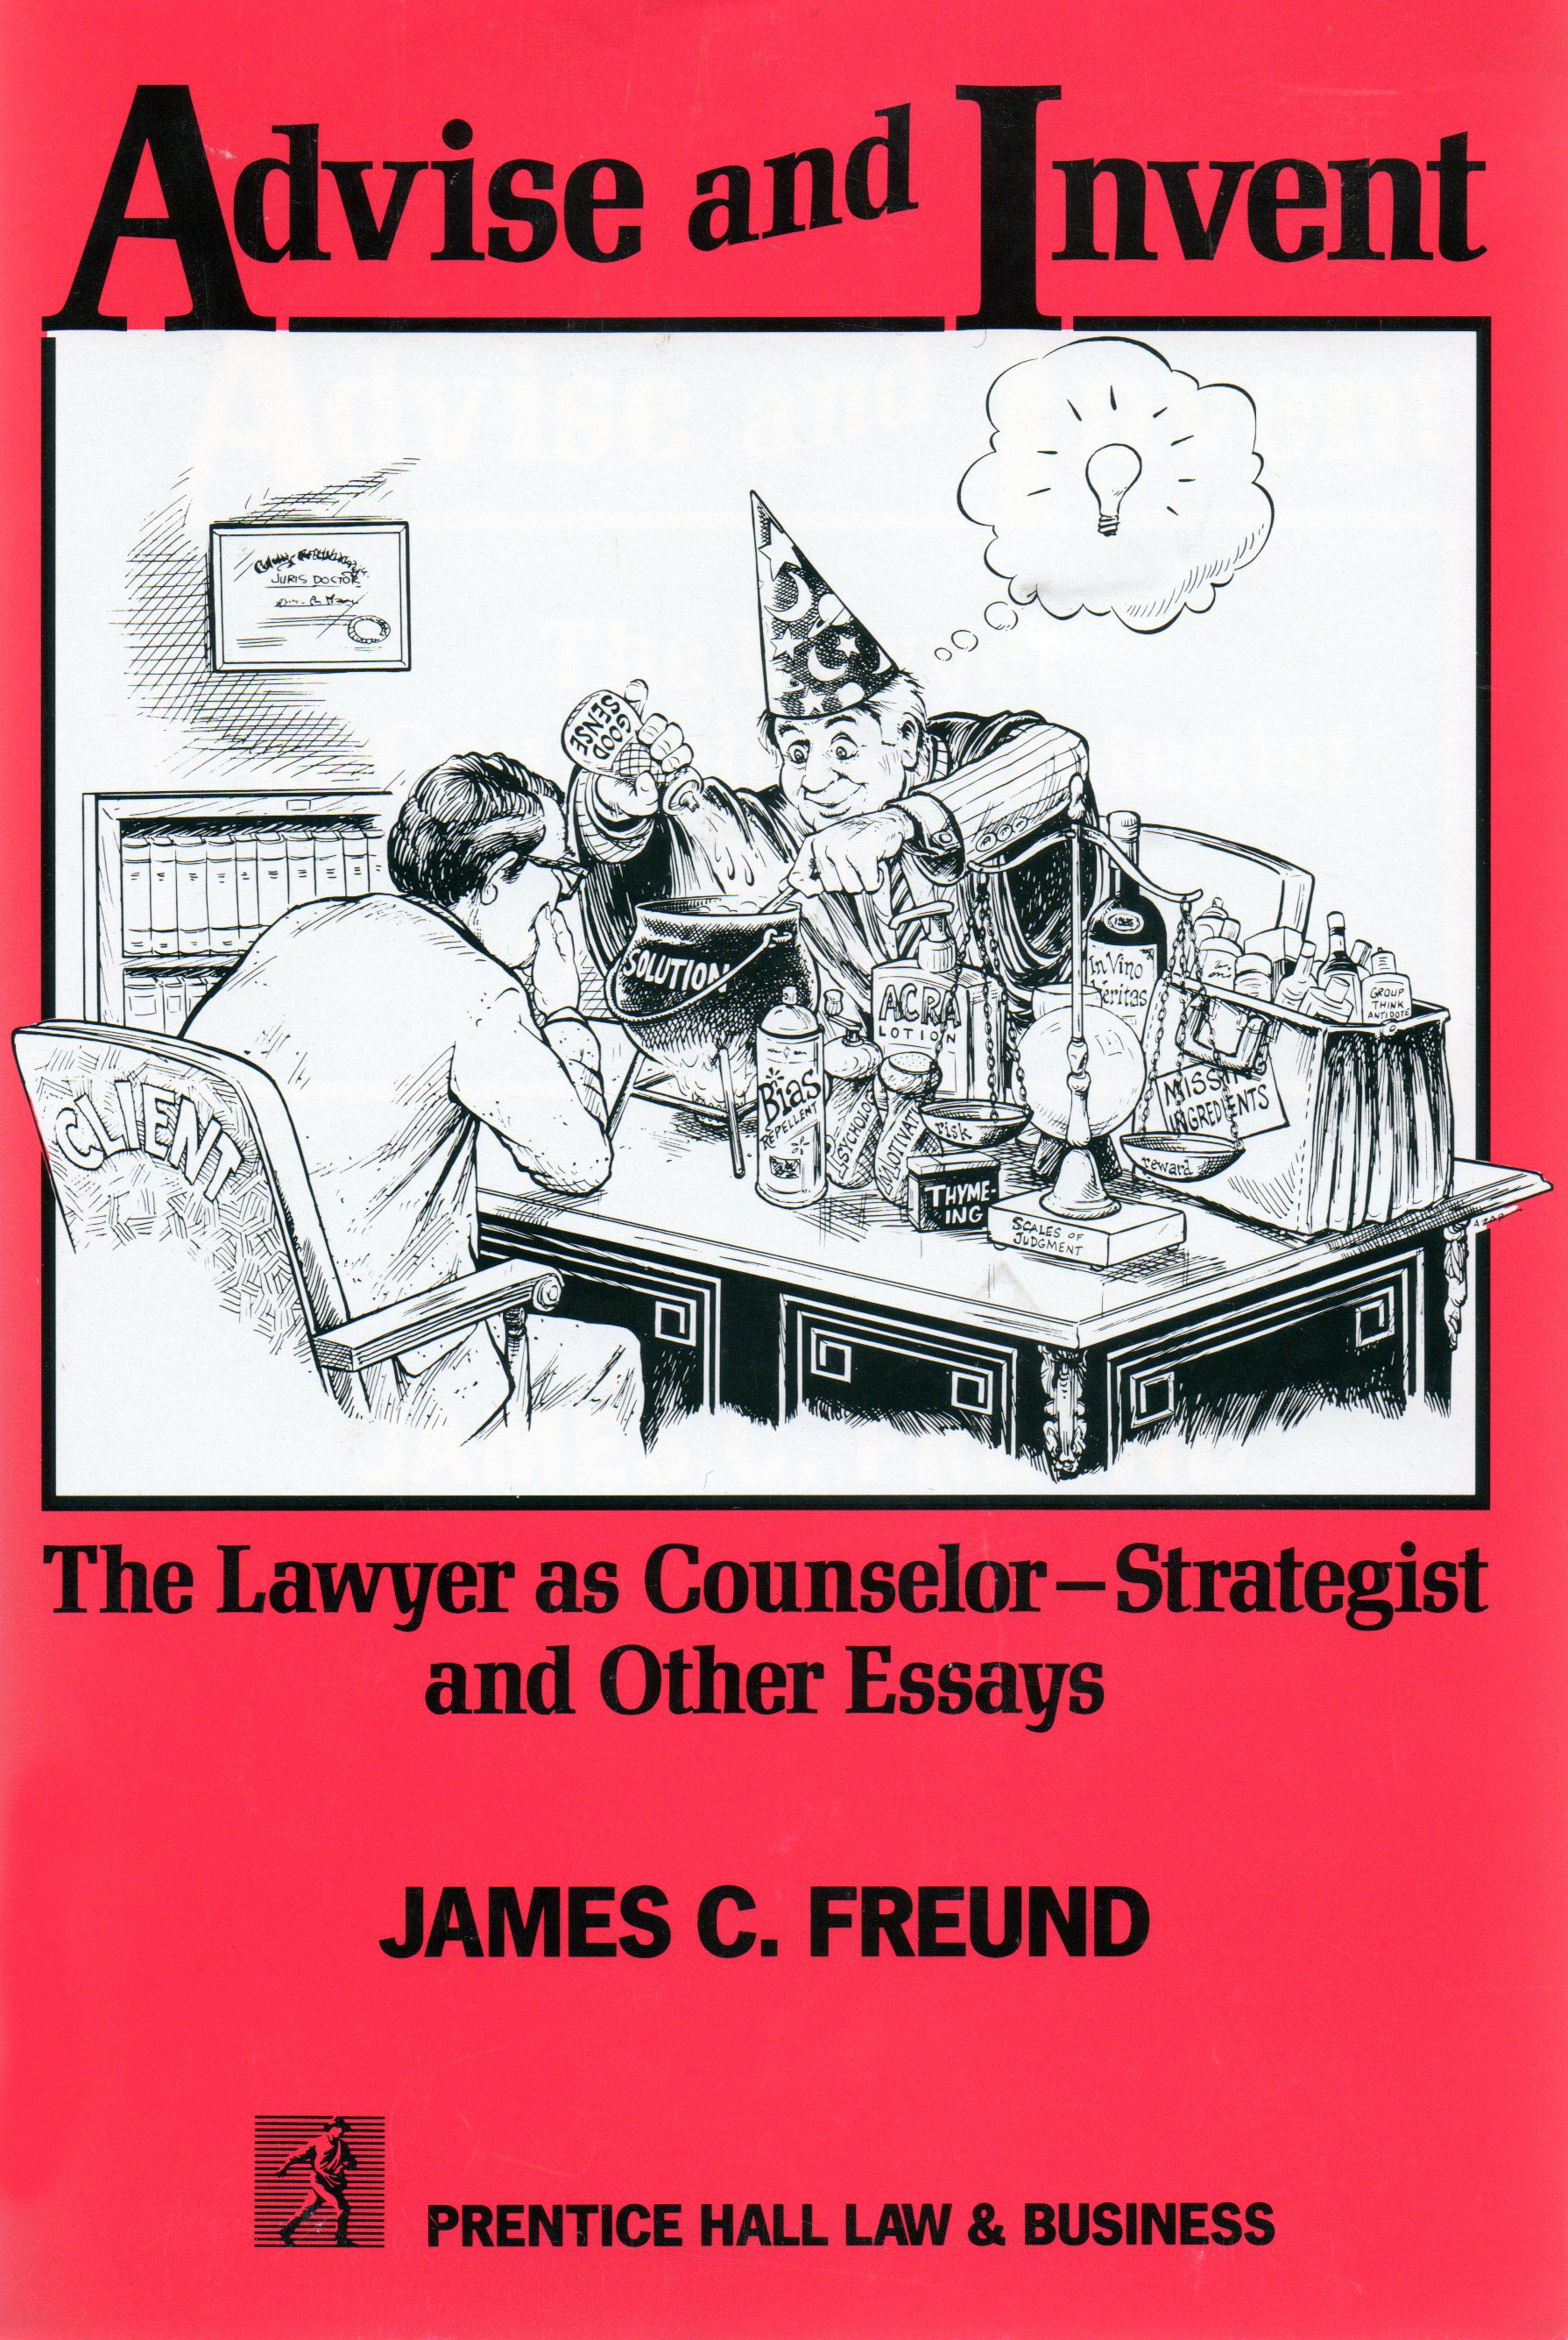 Smart Negotiating: How to Make Good by Freund, James C.